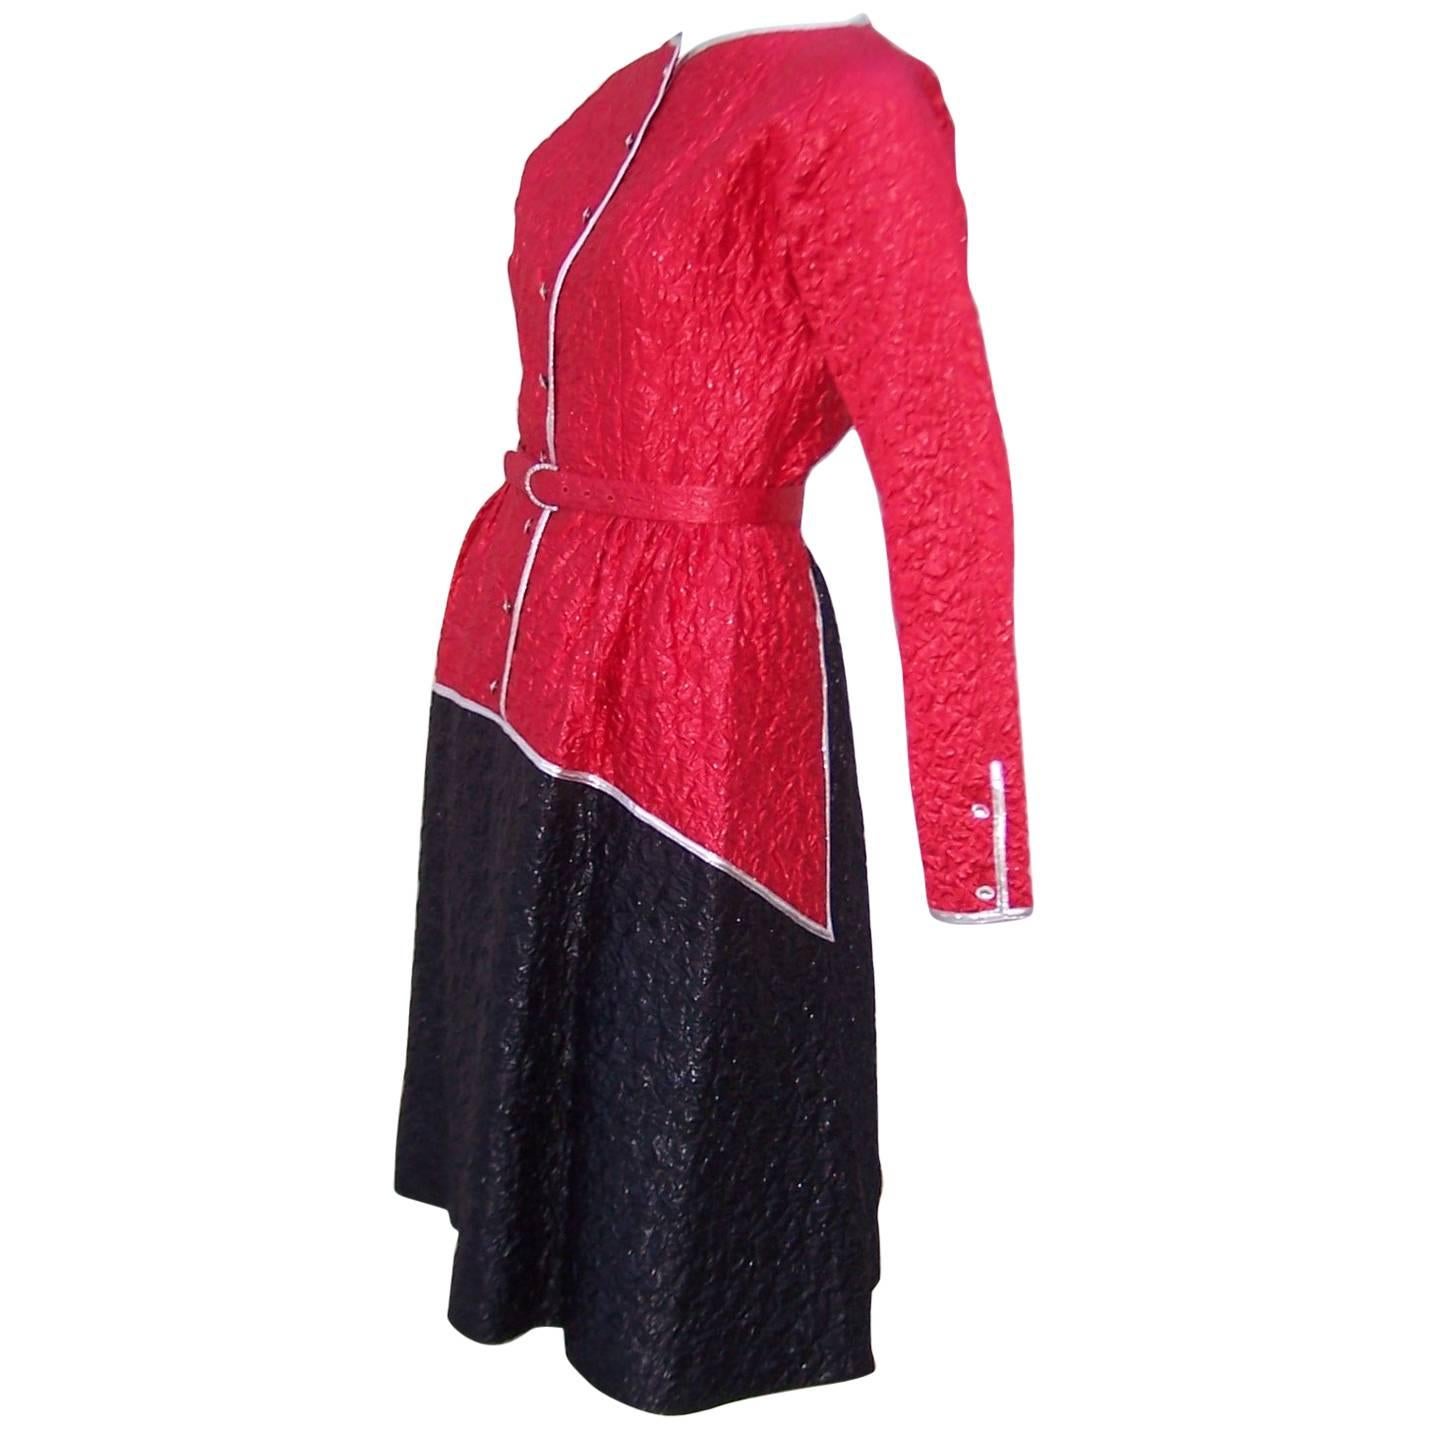 Geoffrey Beene Red, Black & Silver Cocktail Dress, 1970’s For Sale